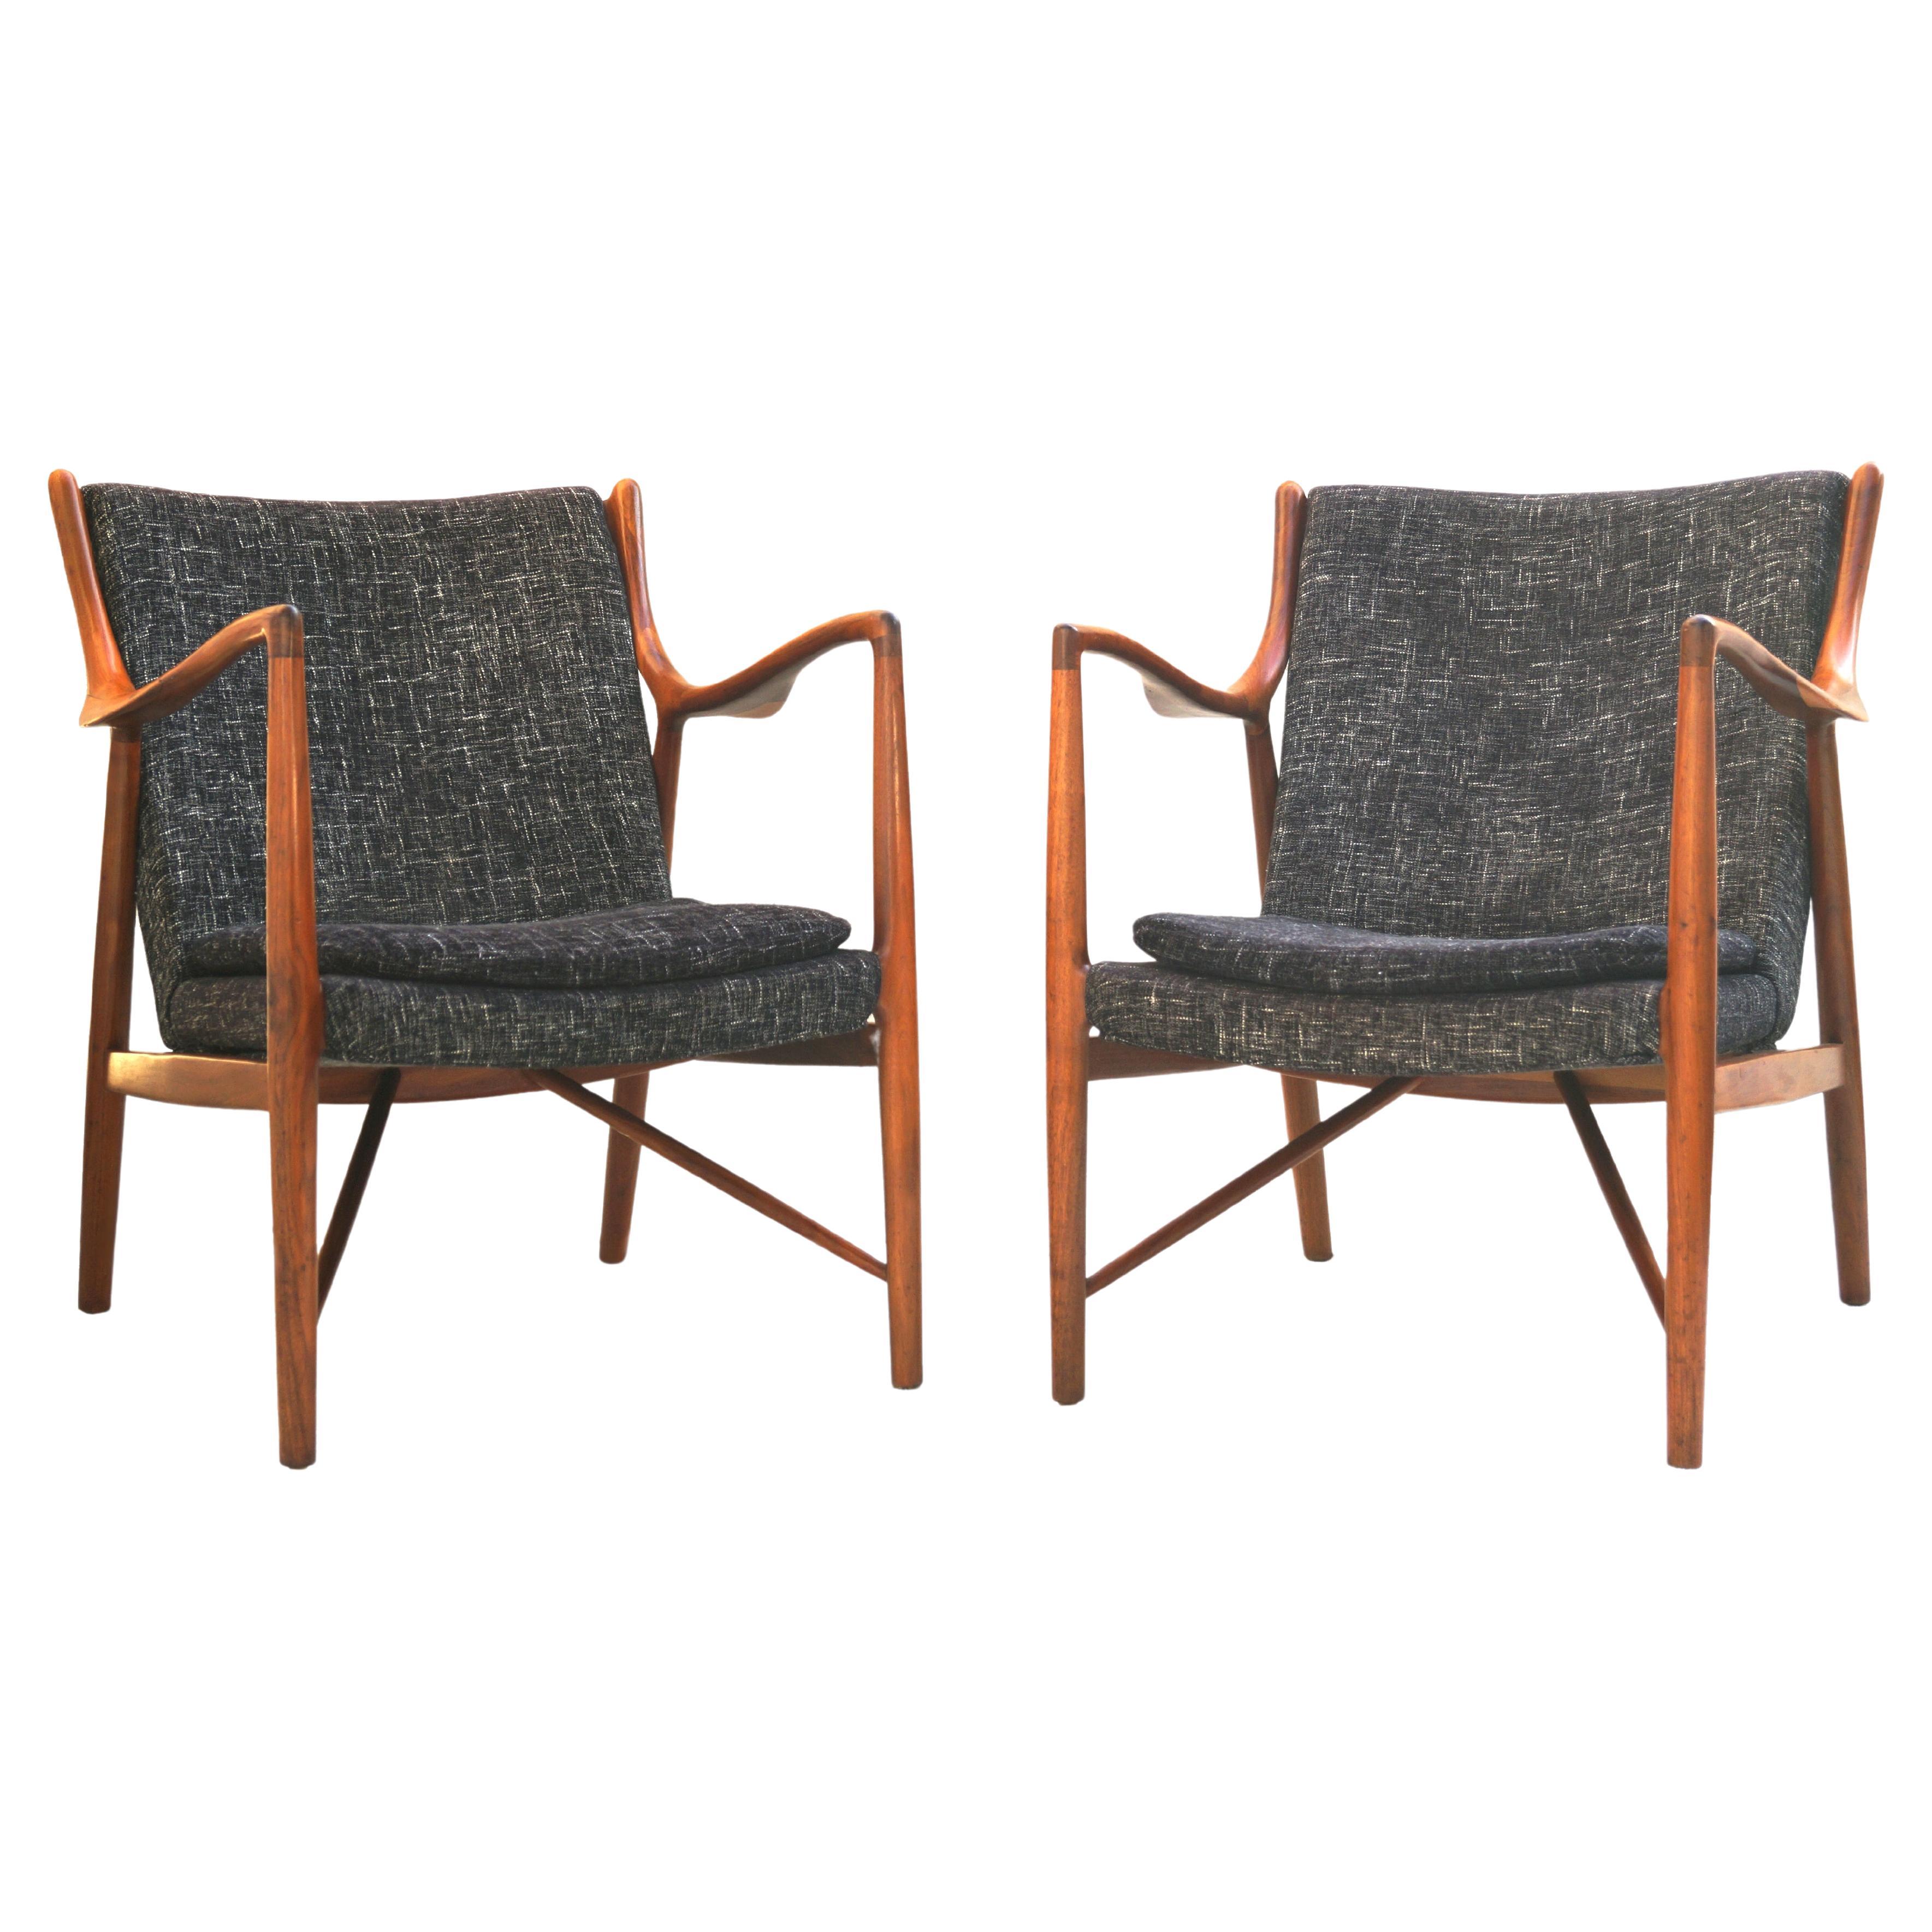 Pair of Mid Century Modern Sculpted Finn Juhl Style Side Lounge Chairs